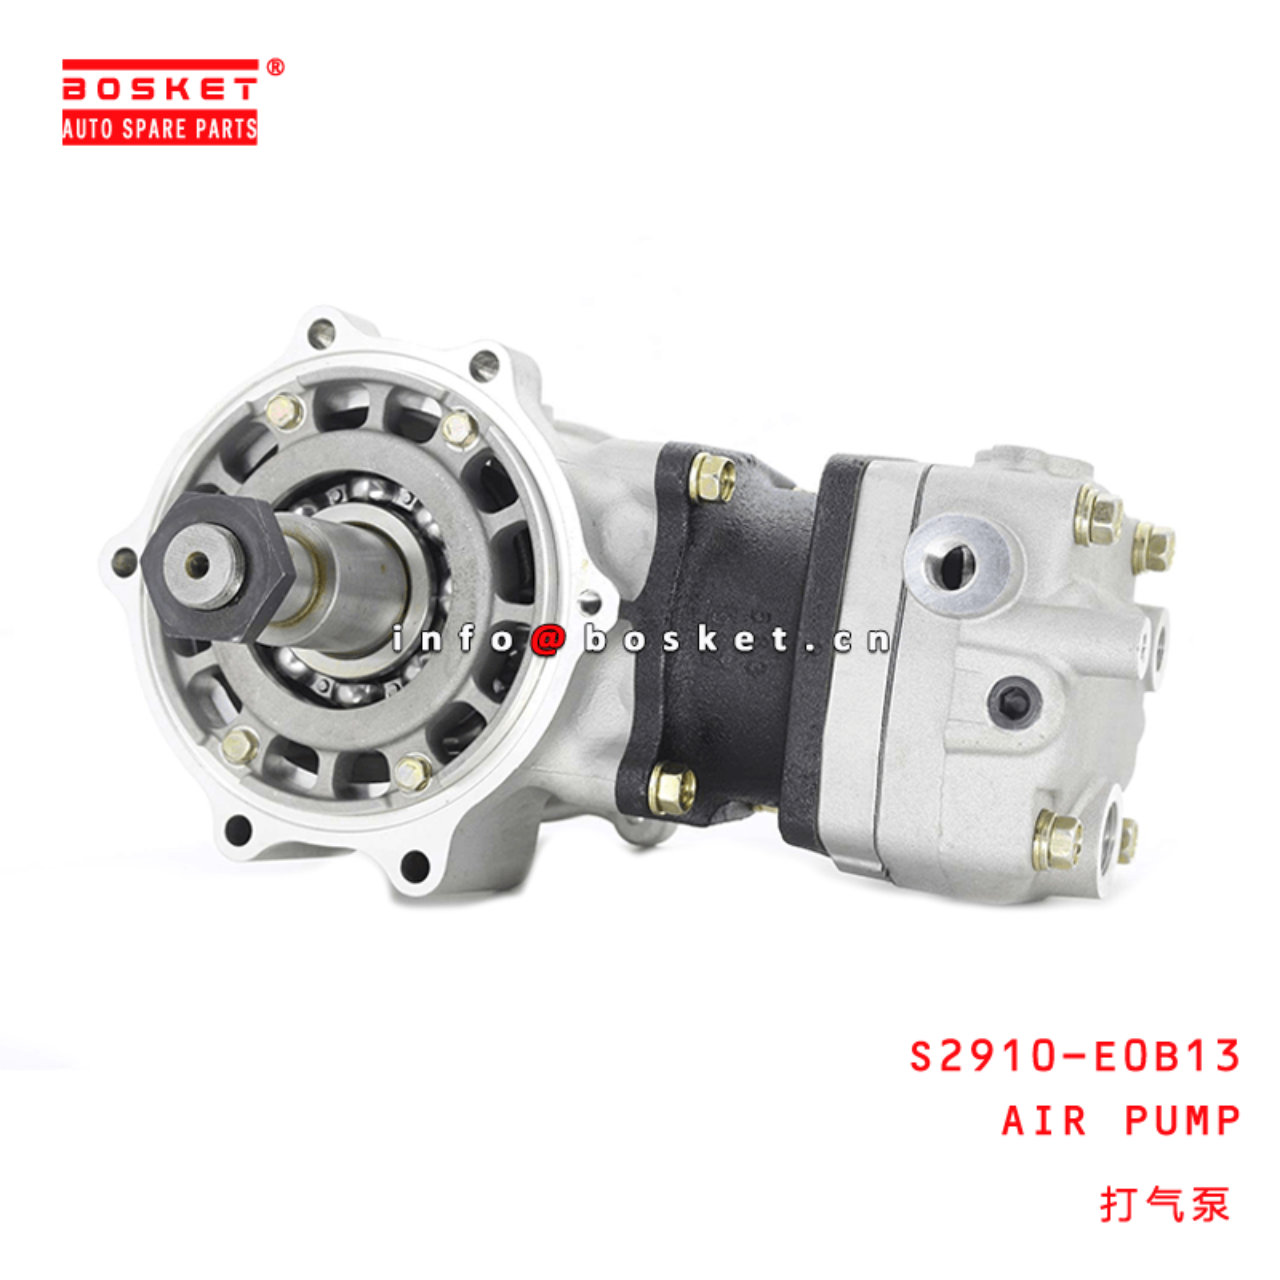 S2910-E0B13 Air Pump Suitable For HINO 500 J08E - For HINO Parts 